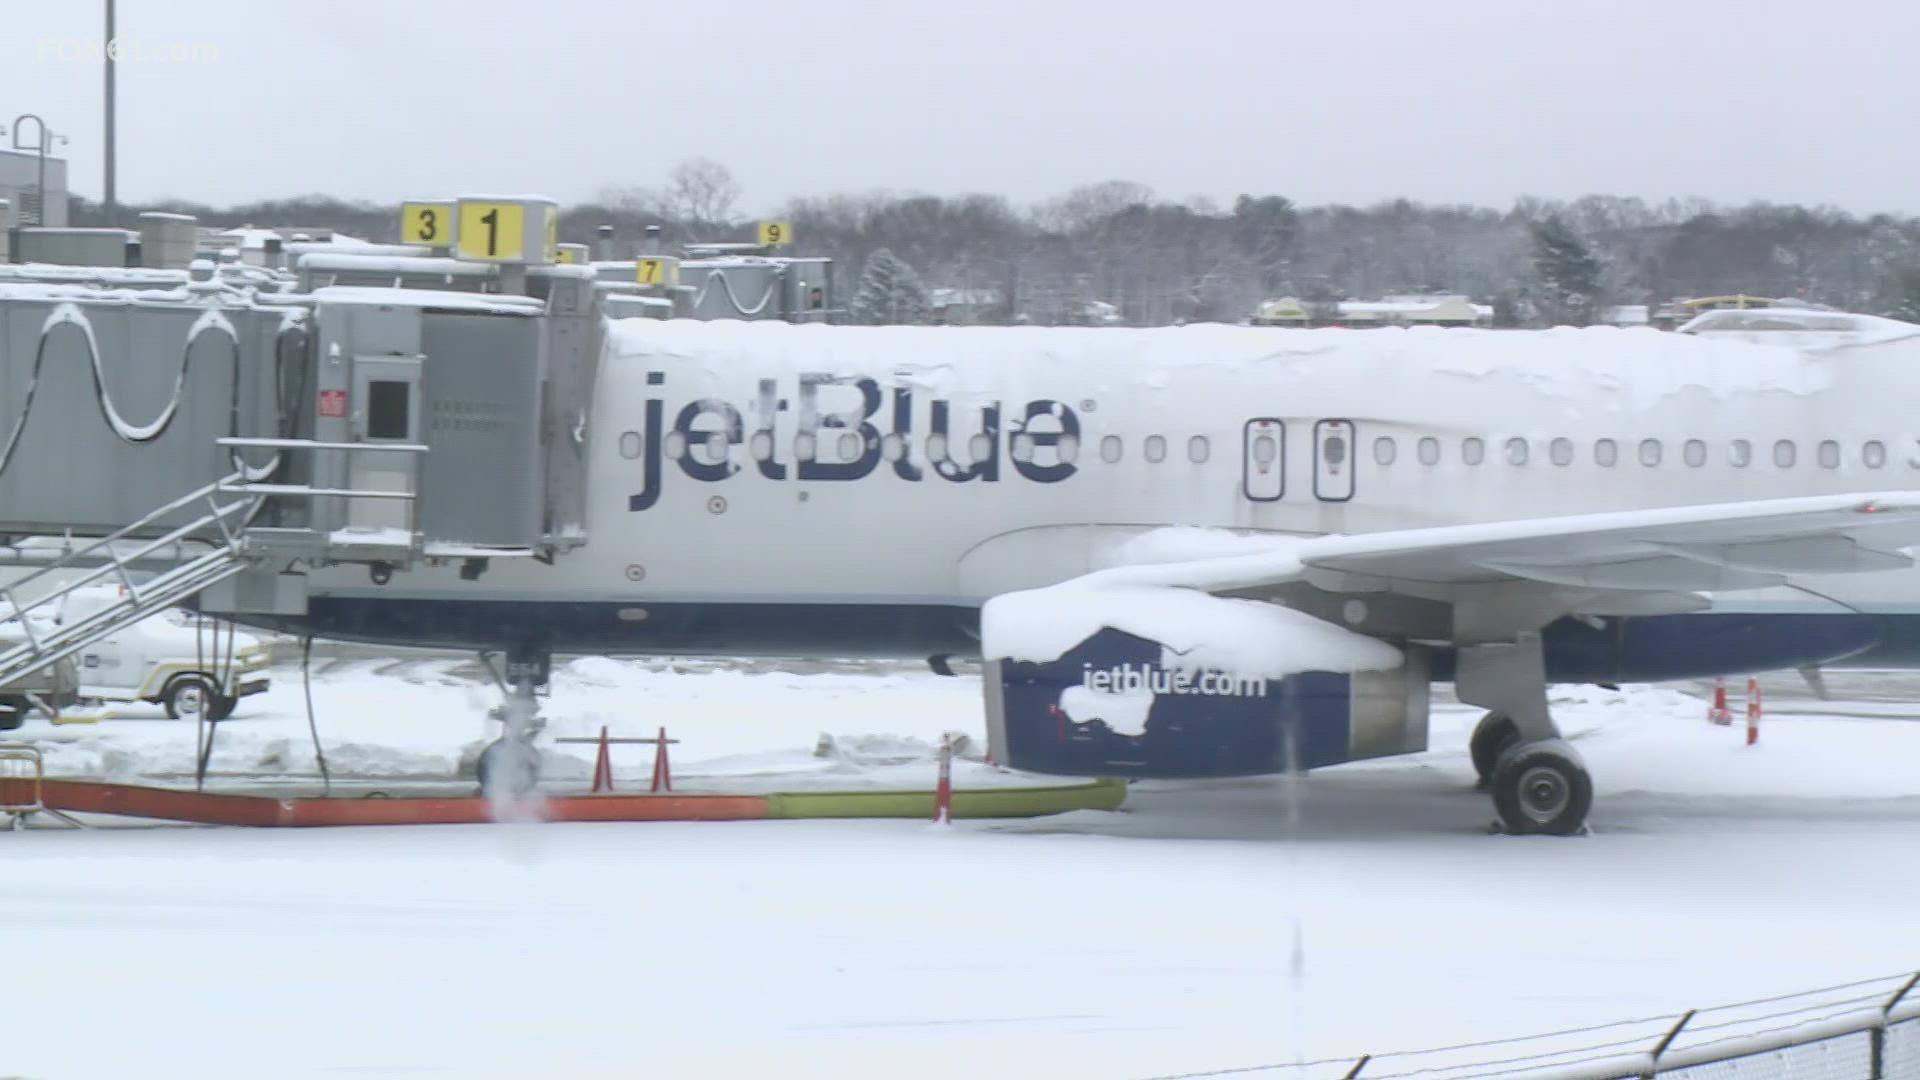 12% of flights at Bradley were impacted Friday. Regionally, snow impacted more than 2,400 flights across the Northeast